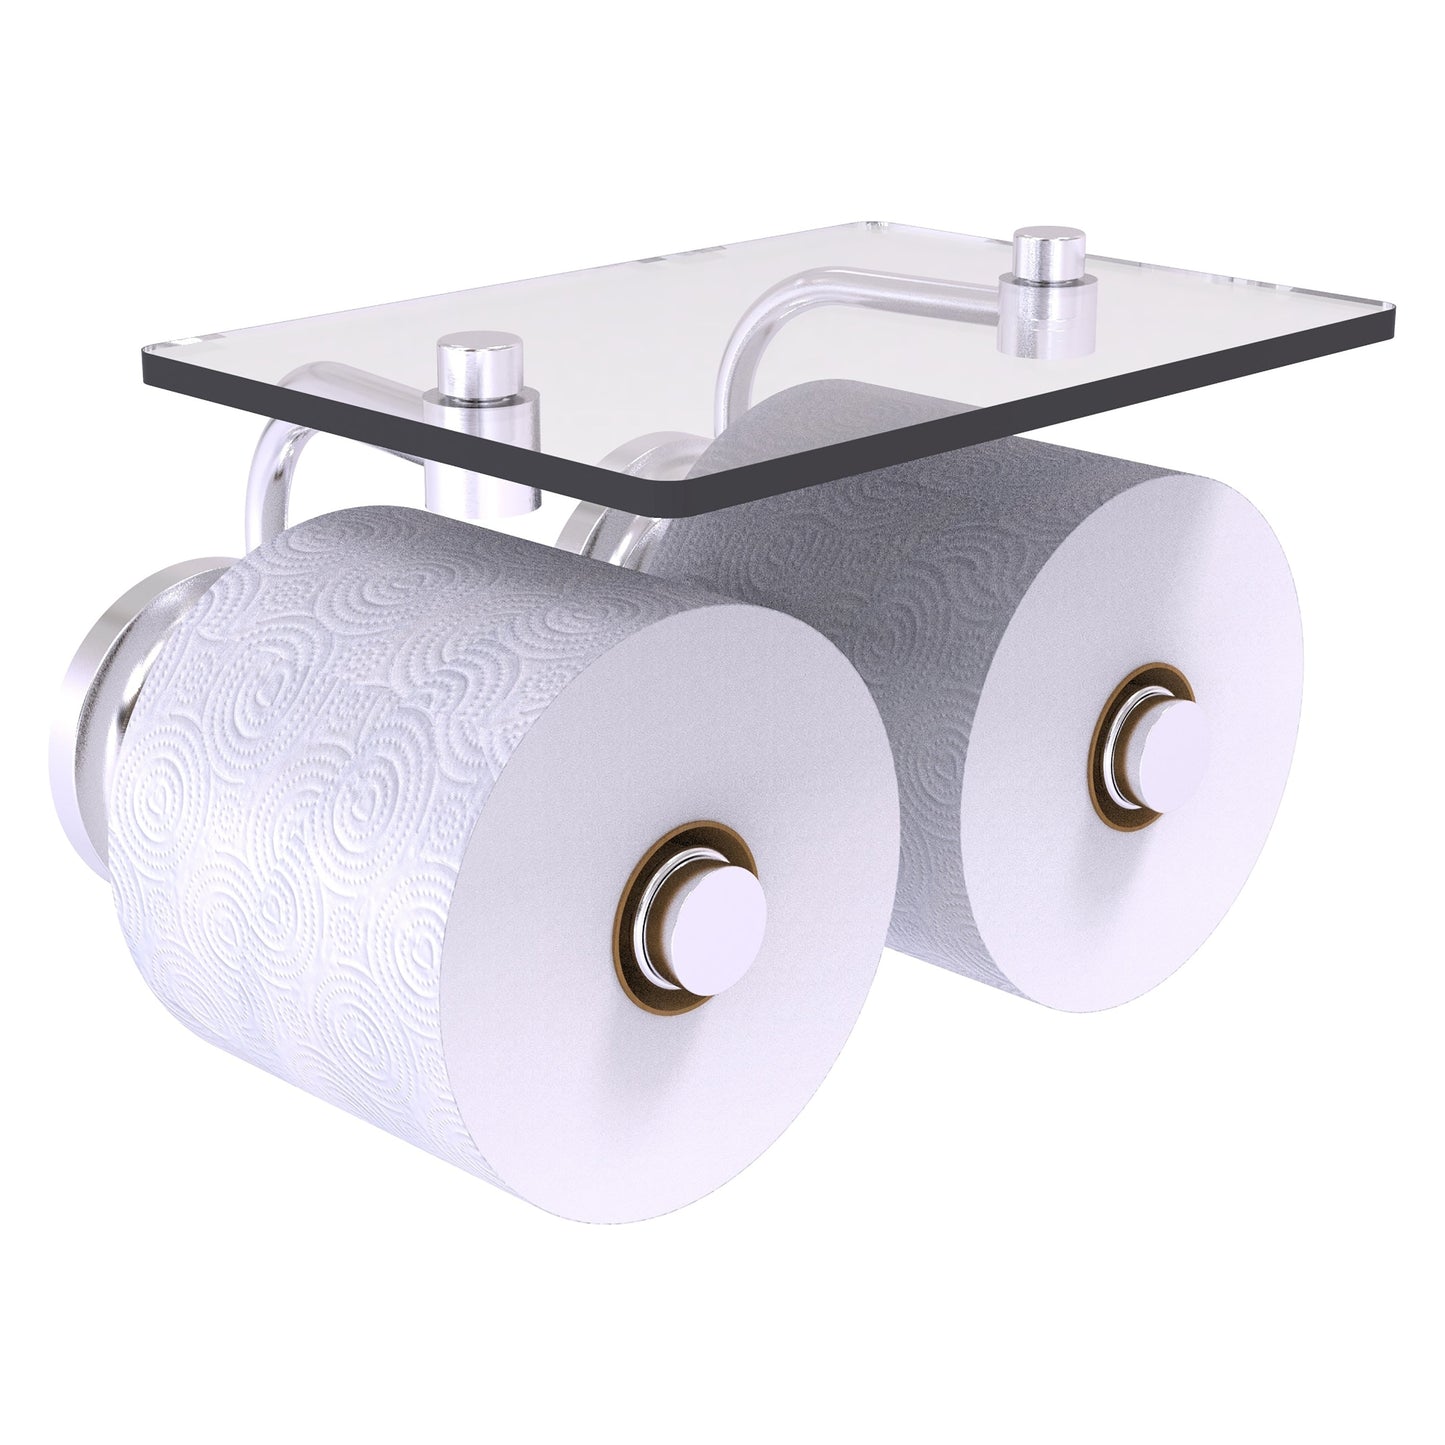 Allied Brass Que New 8.5" x 7.4" Satin Chrome Solid Brass 2-Roll Toilet Paper Holder With Glass Shelf